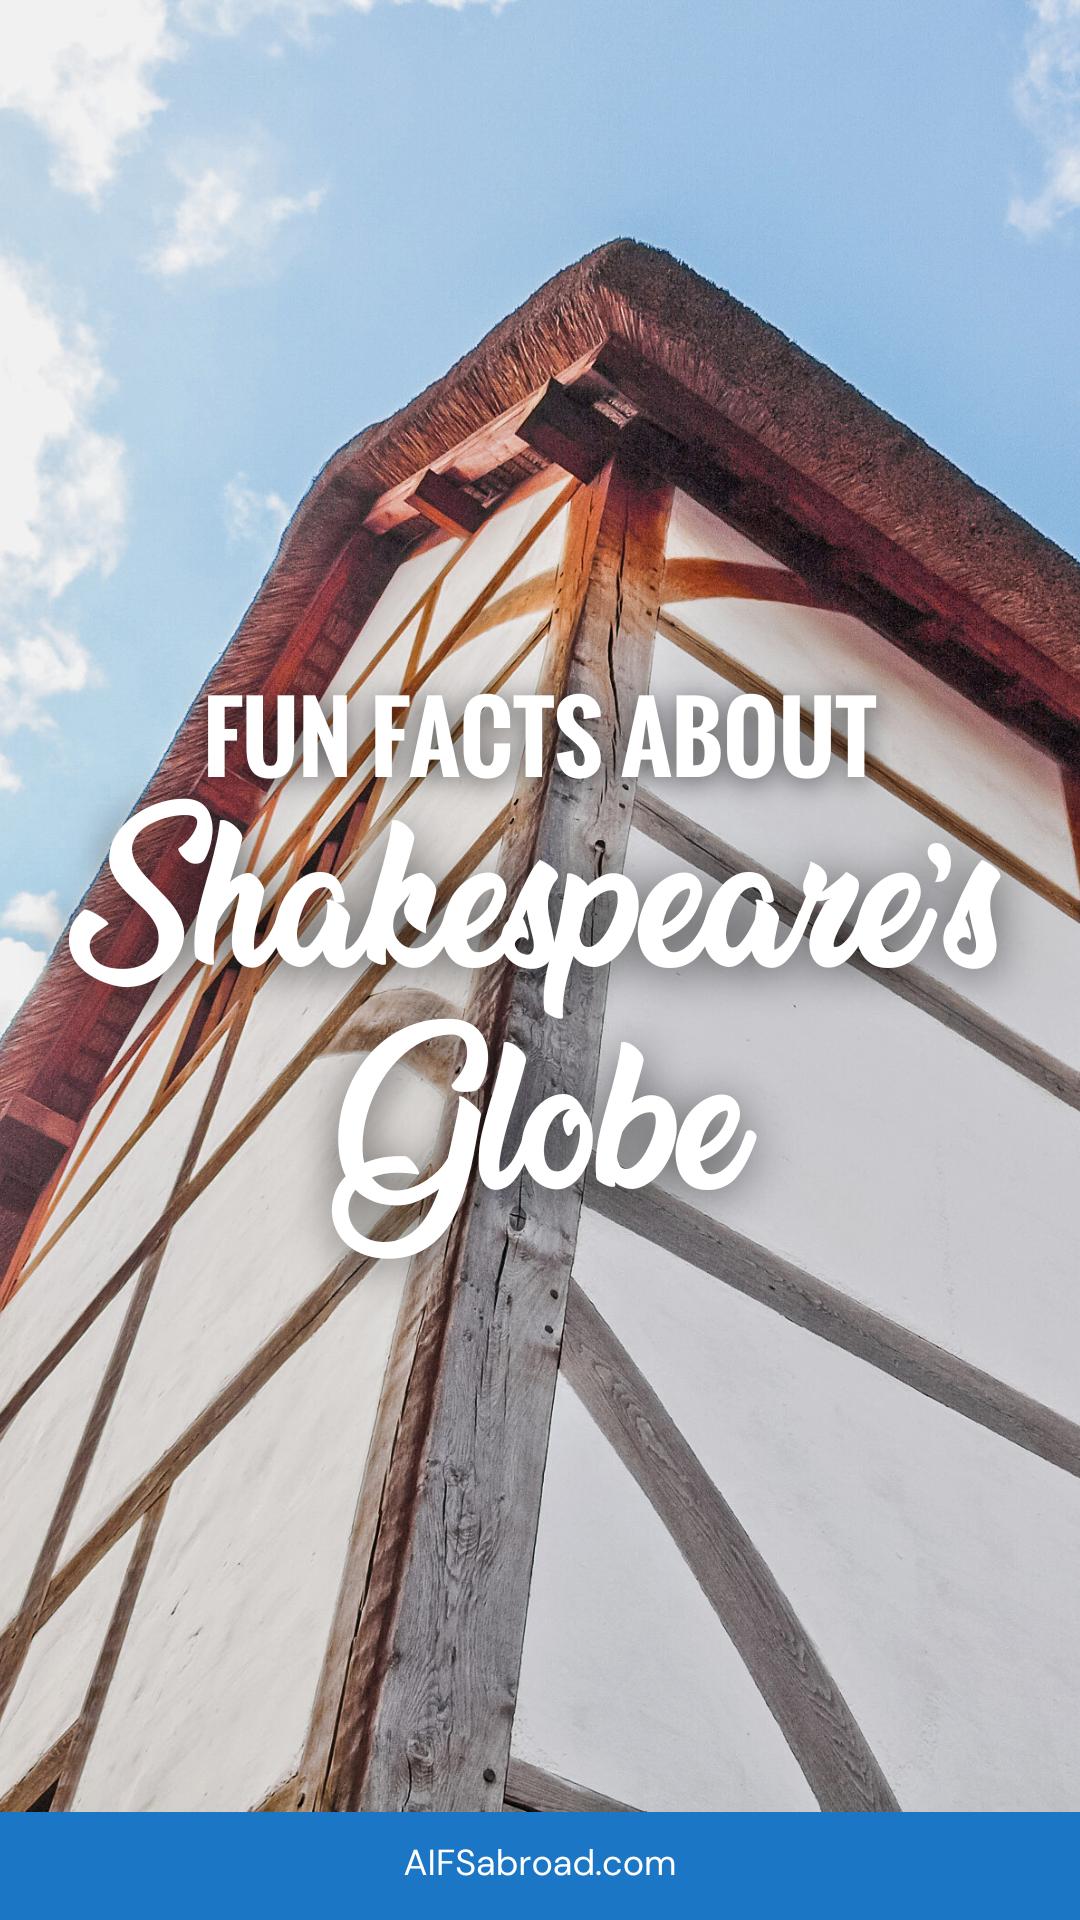 Pin image - Façade of The Globe Theatre in London, England with text overlay "Fun Facts About Shakespeare's Globe"